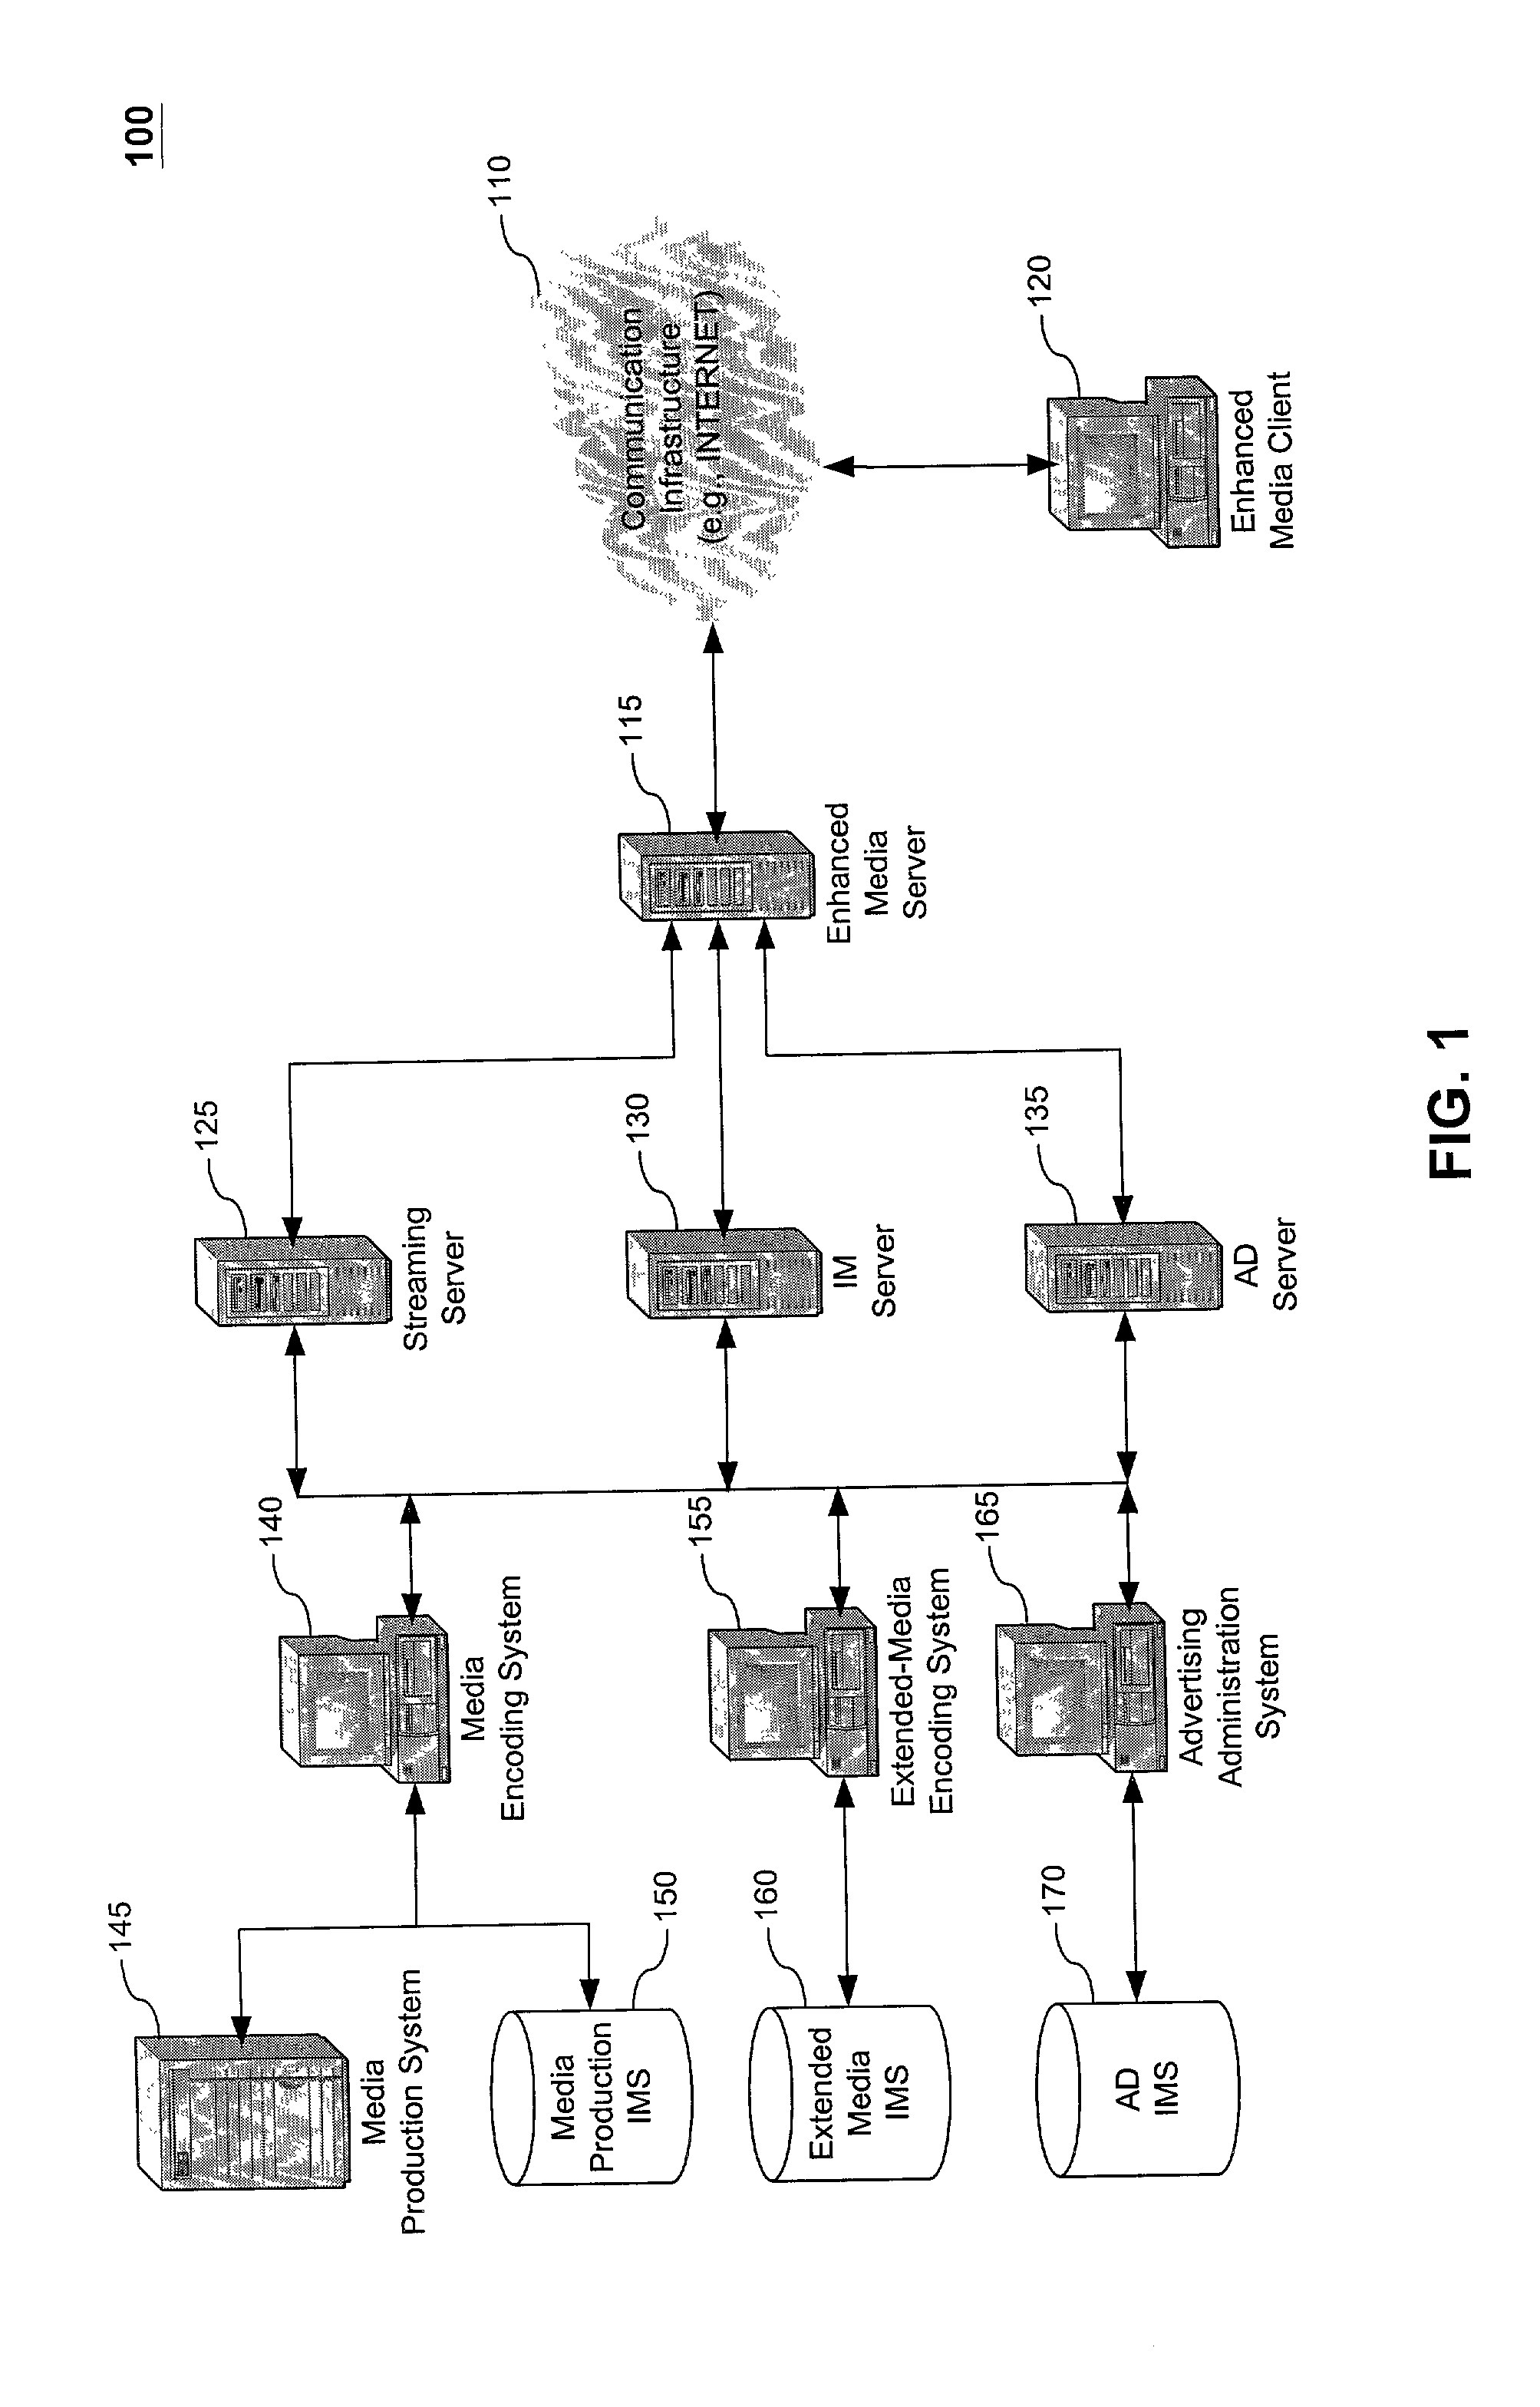 Method, system and computer program product for producing and distributing enhanced media downstreams